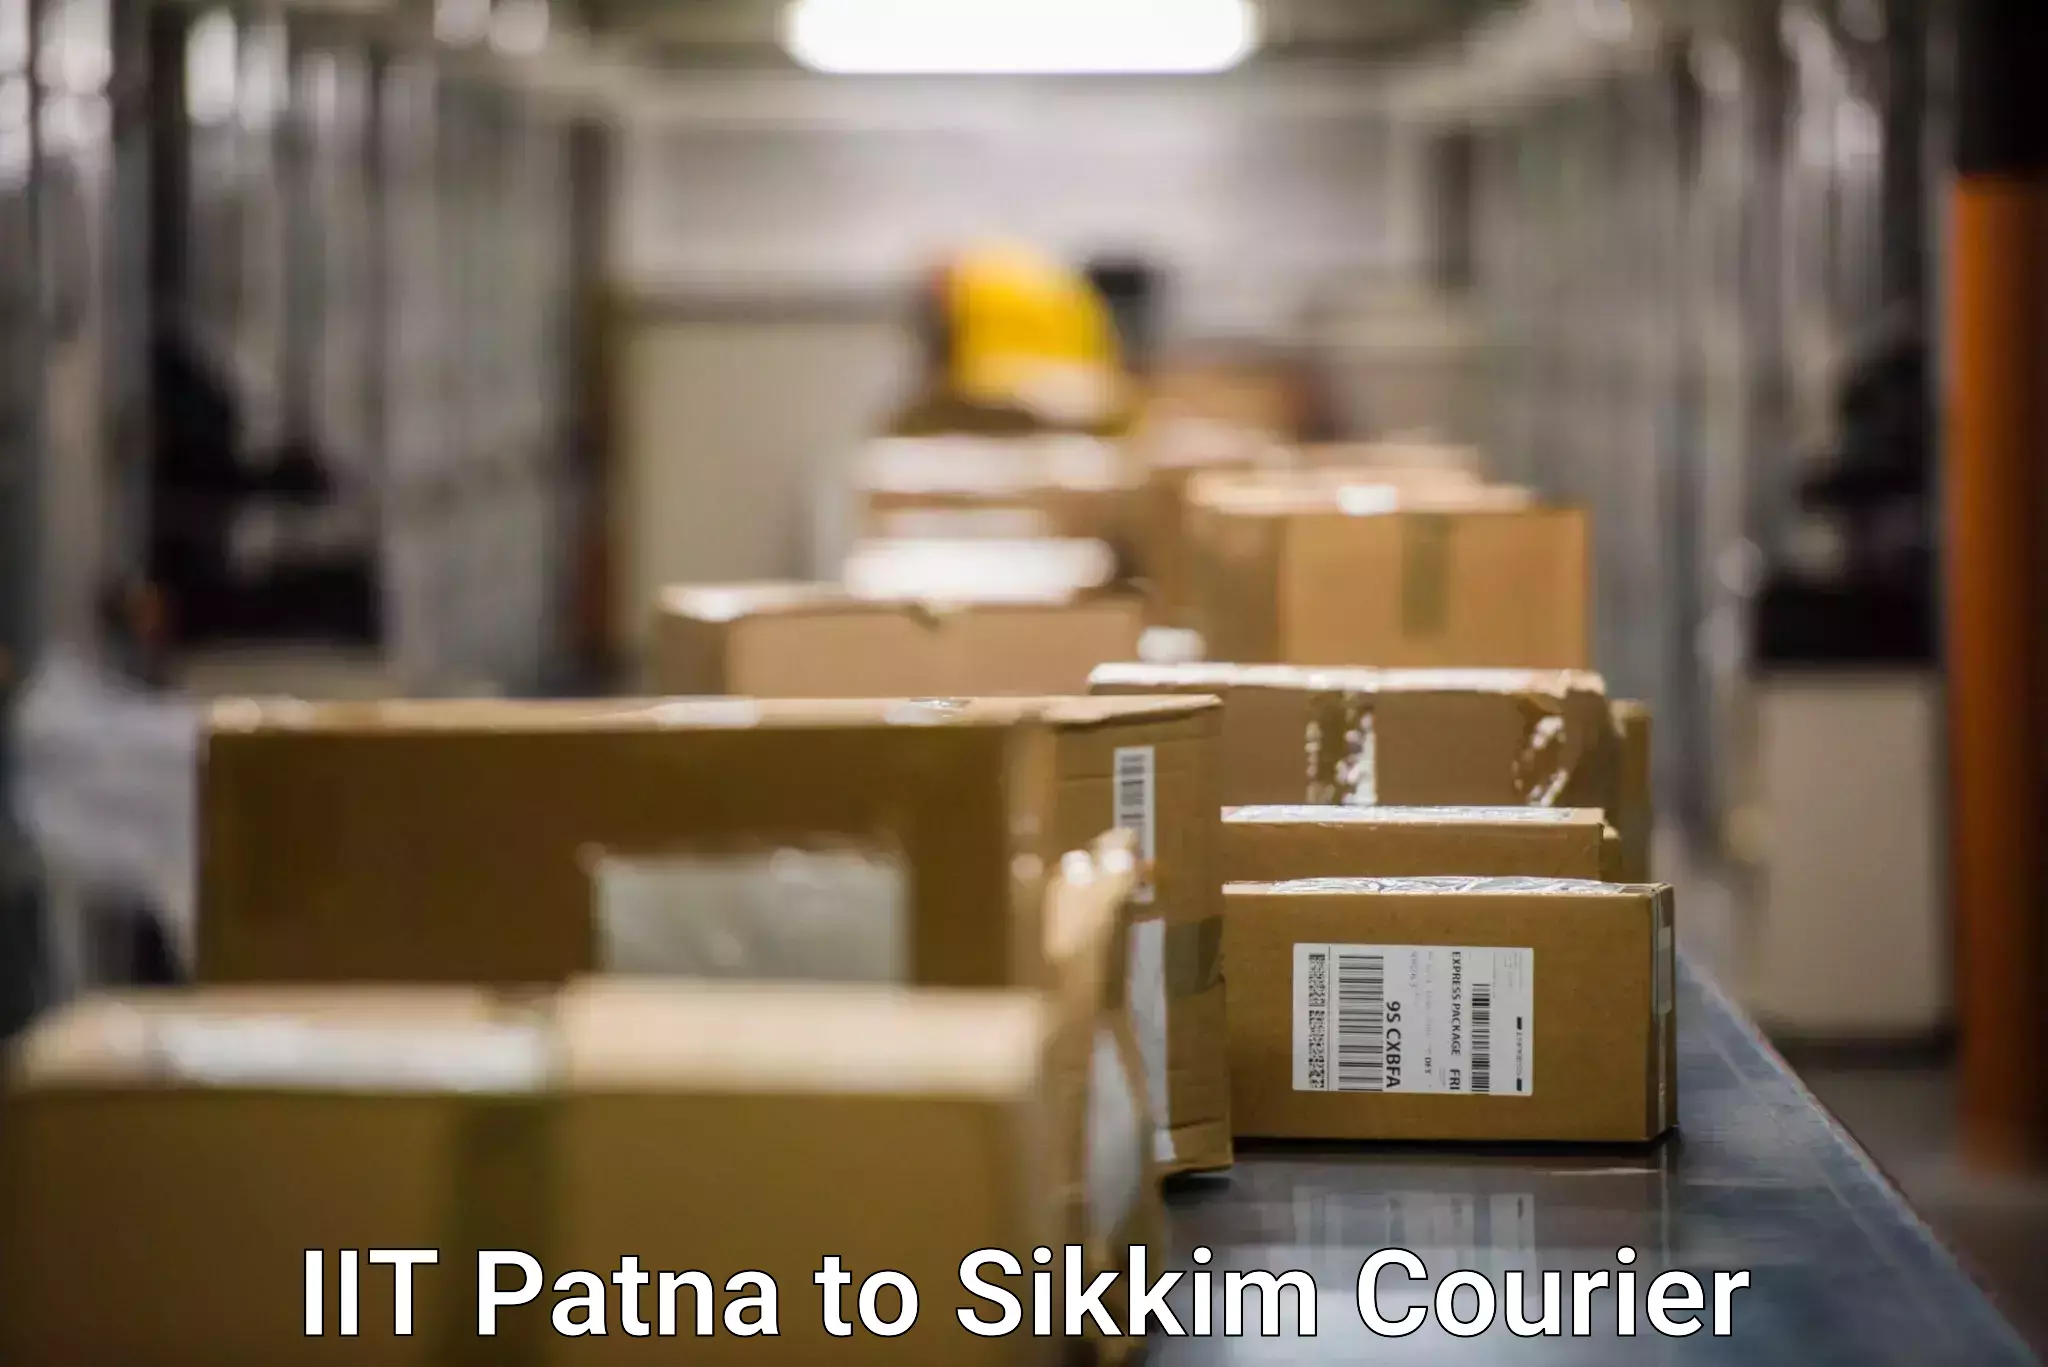 Fast shipping solutions IIT Patna to Gangtok